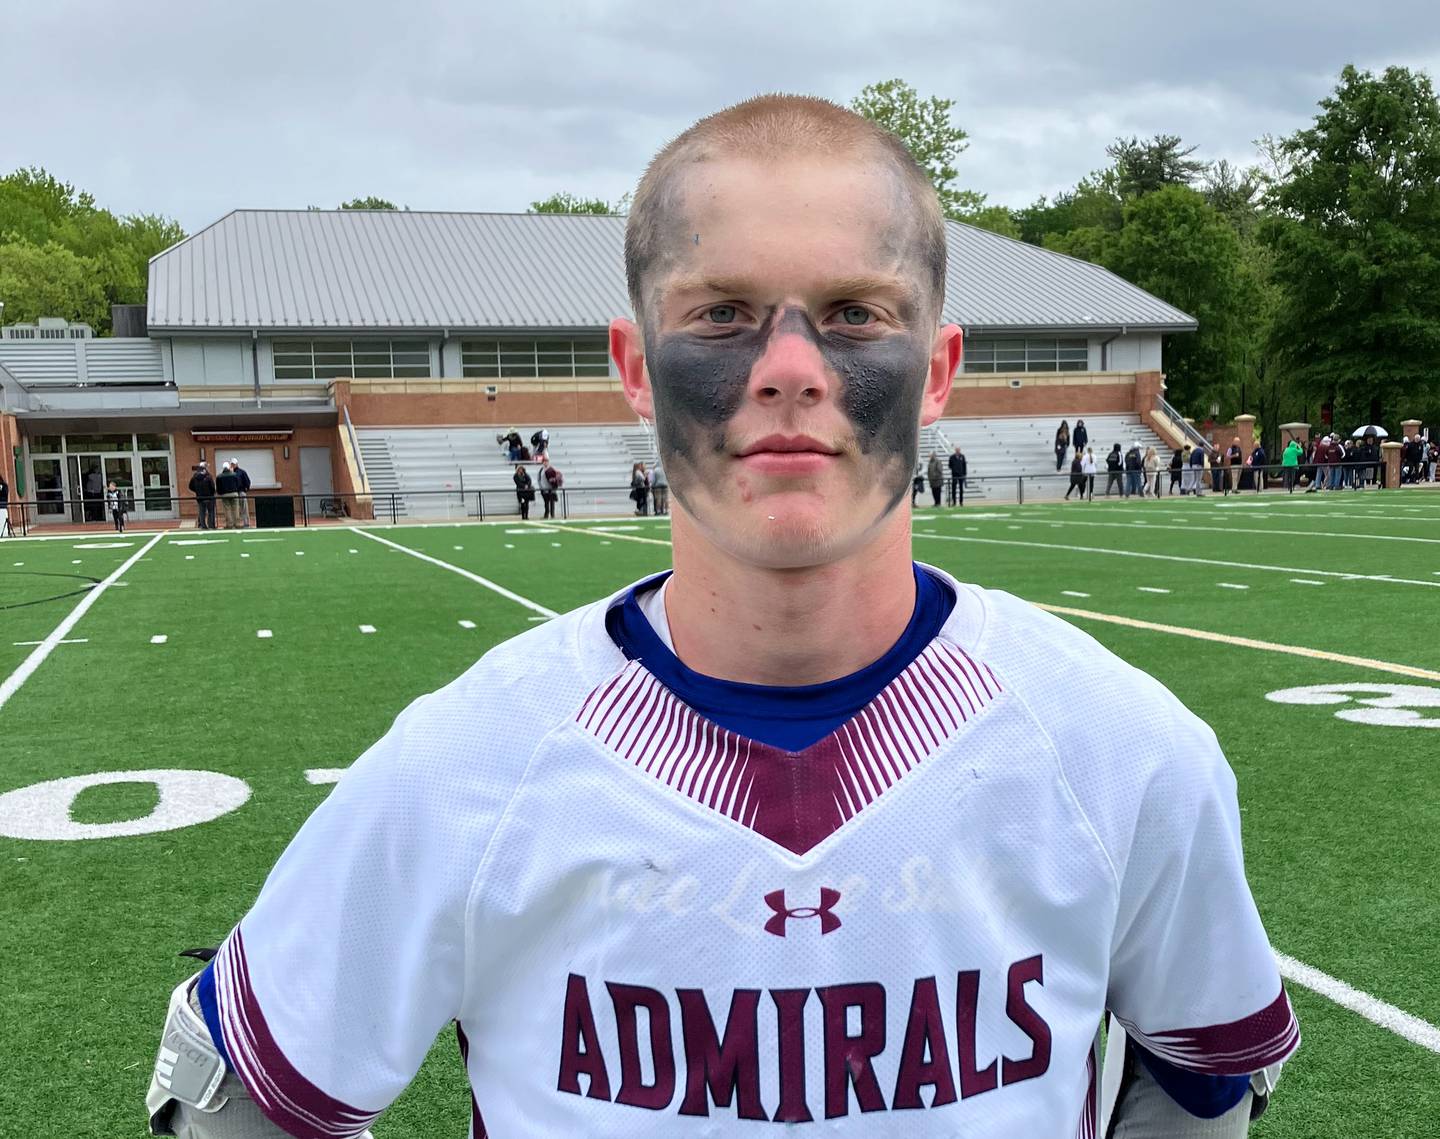 Andrew Beard kept Severn's postseason hopes alive Tuesday. His goal with 2 minutes, 24 seconds left in regulationn gave the No. 10 Admirals a 9-8 victory in a MIAA A Conference contest in Anne Arundel County.